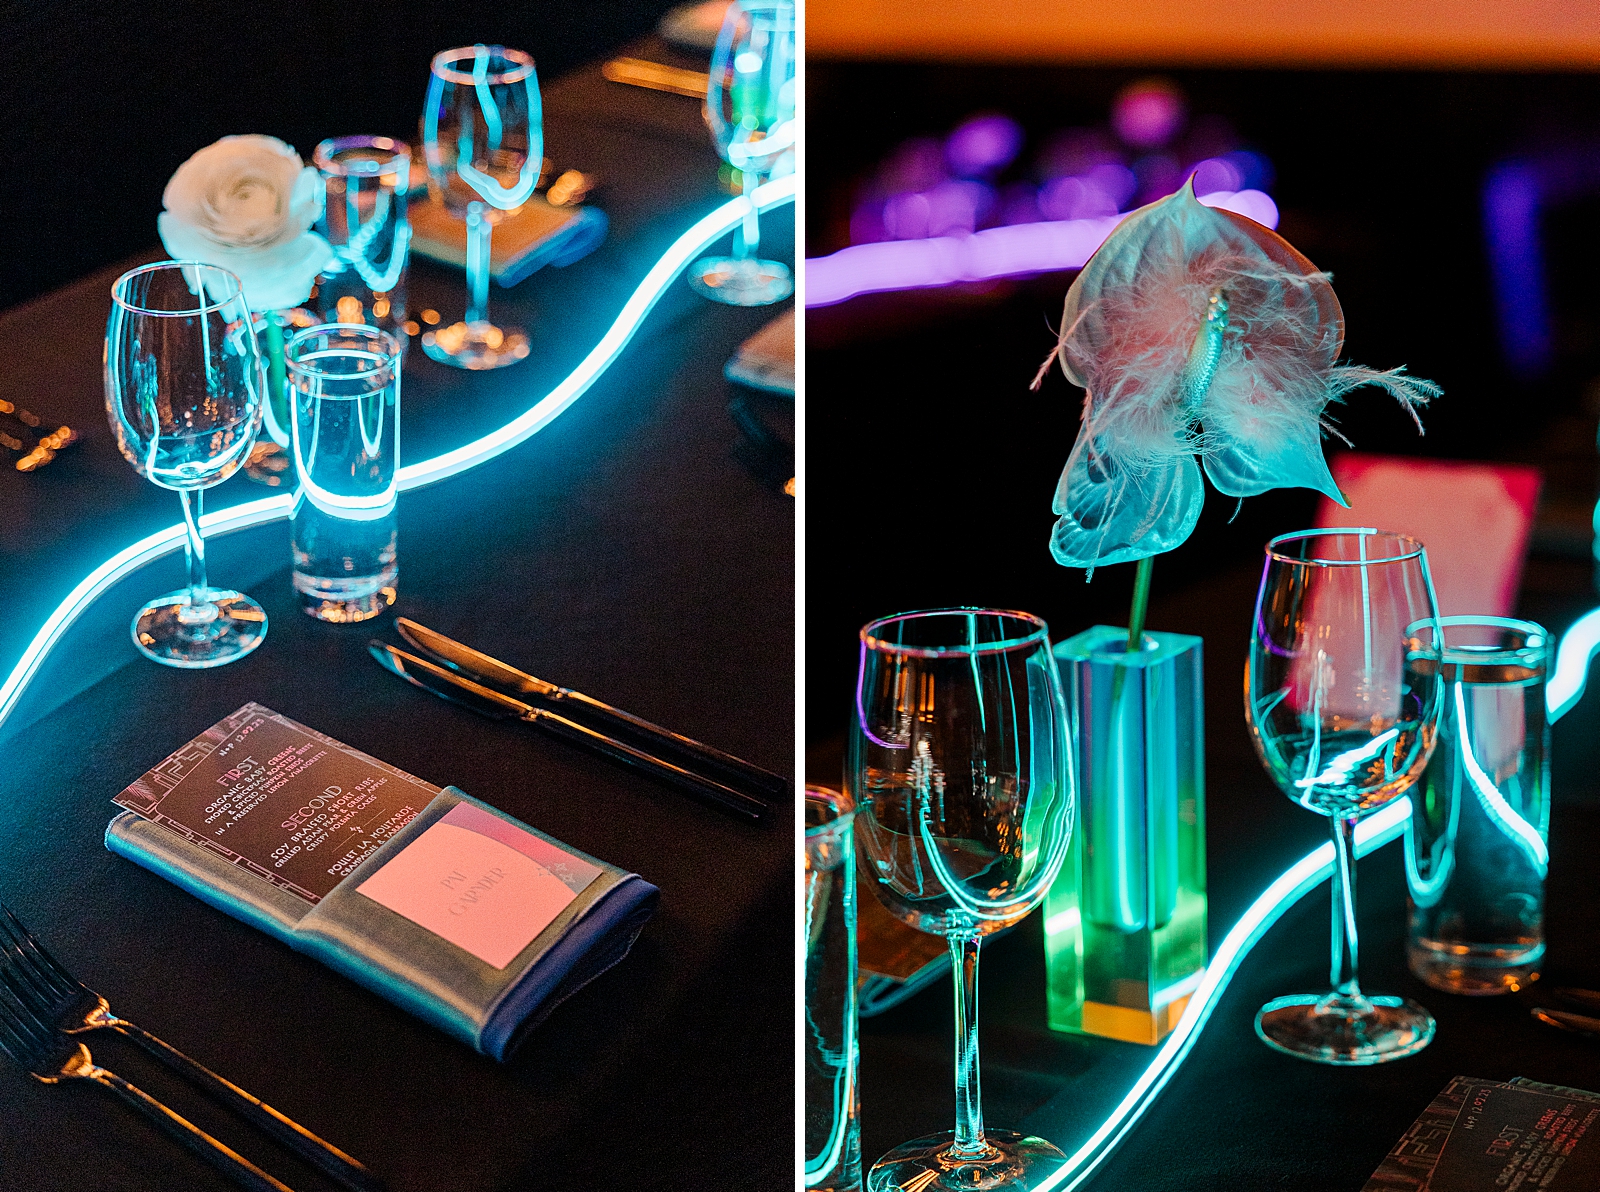 Left photo: Close up shot of a table setting in the reception space, complete with a menu, place card, napkin, flowers, glasses, and a long neon light. 
Right photo: Close up shot of a table in the reception space, complete with cutlery, flowers, glasses, and a long neon light.  